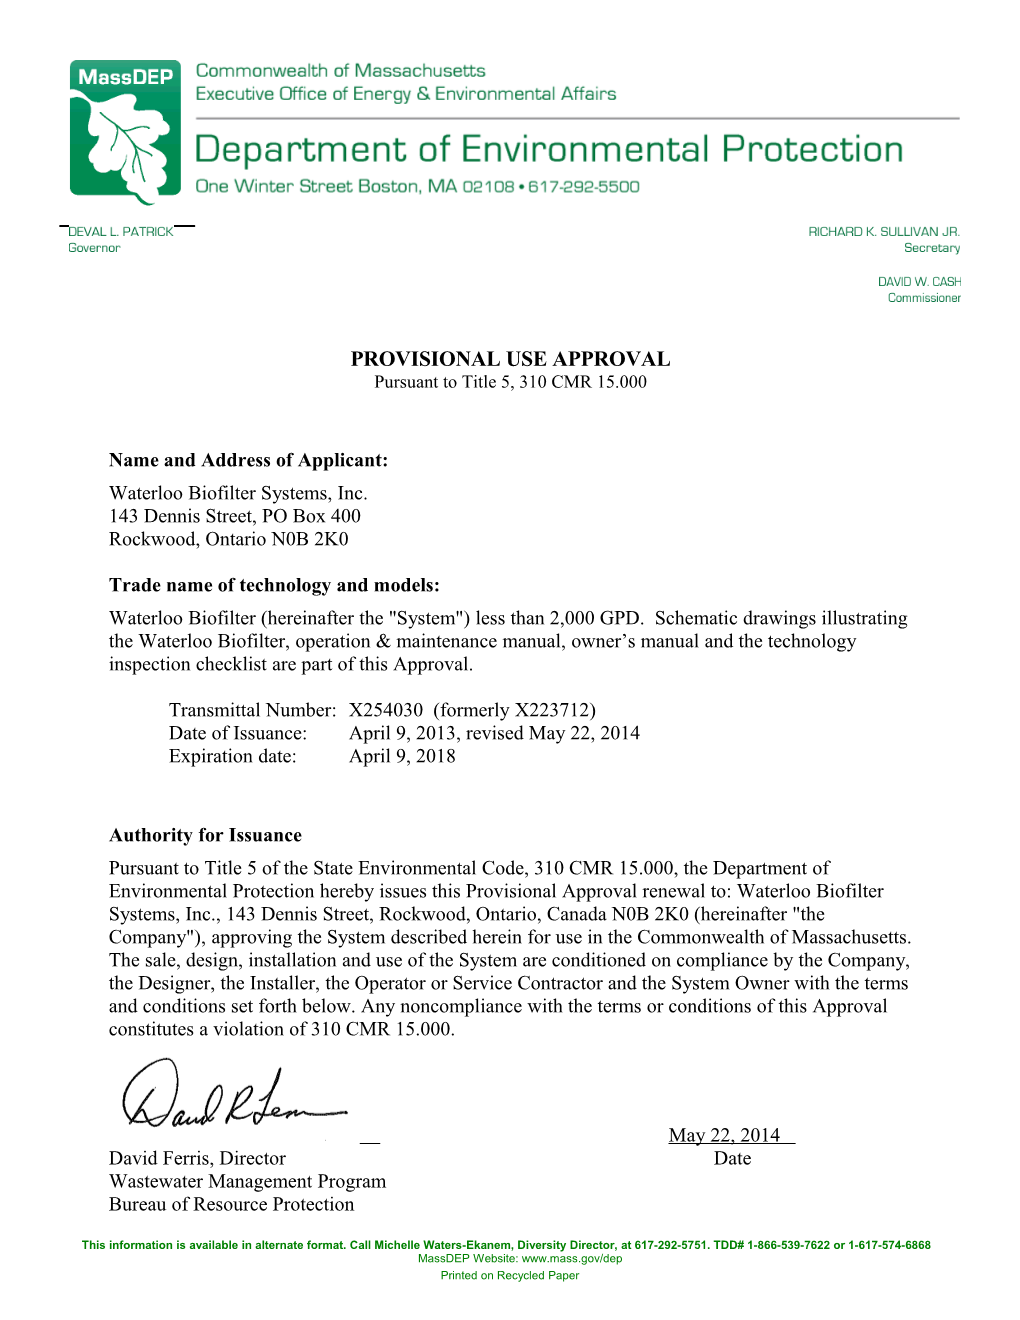 Renewal of Provisional Use Approval May 22, 2014Page 1 of 15